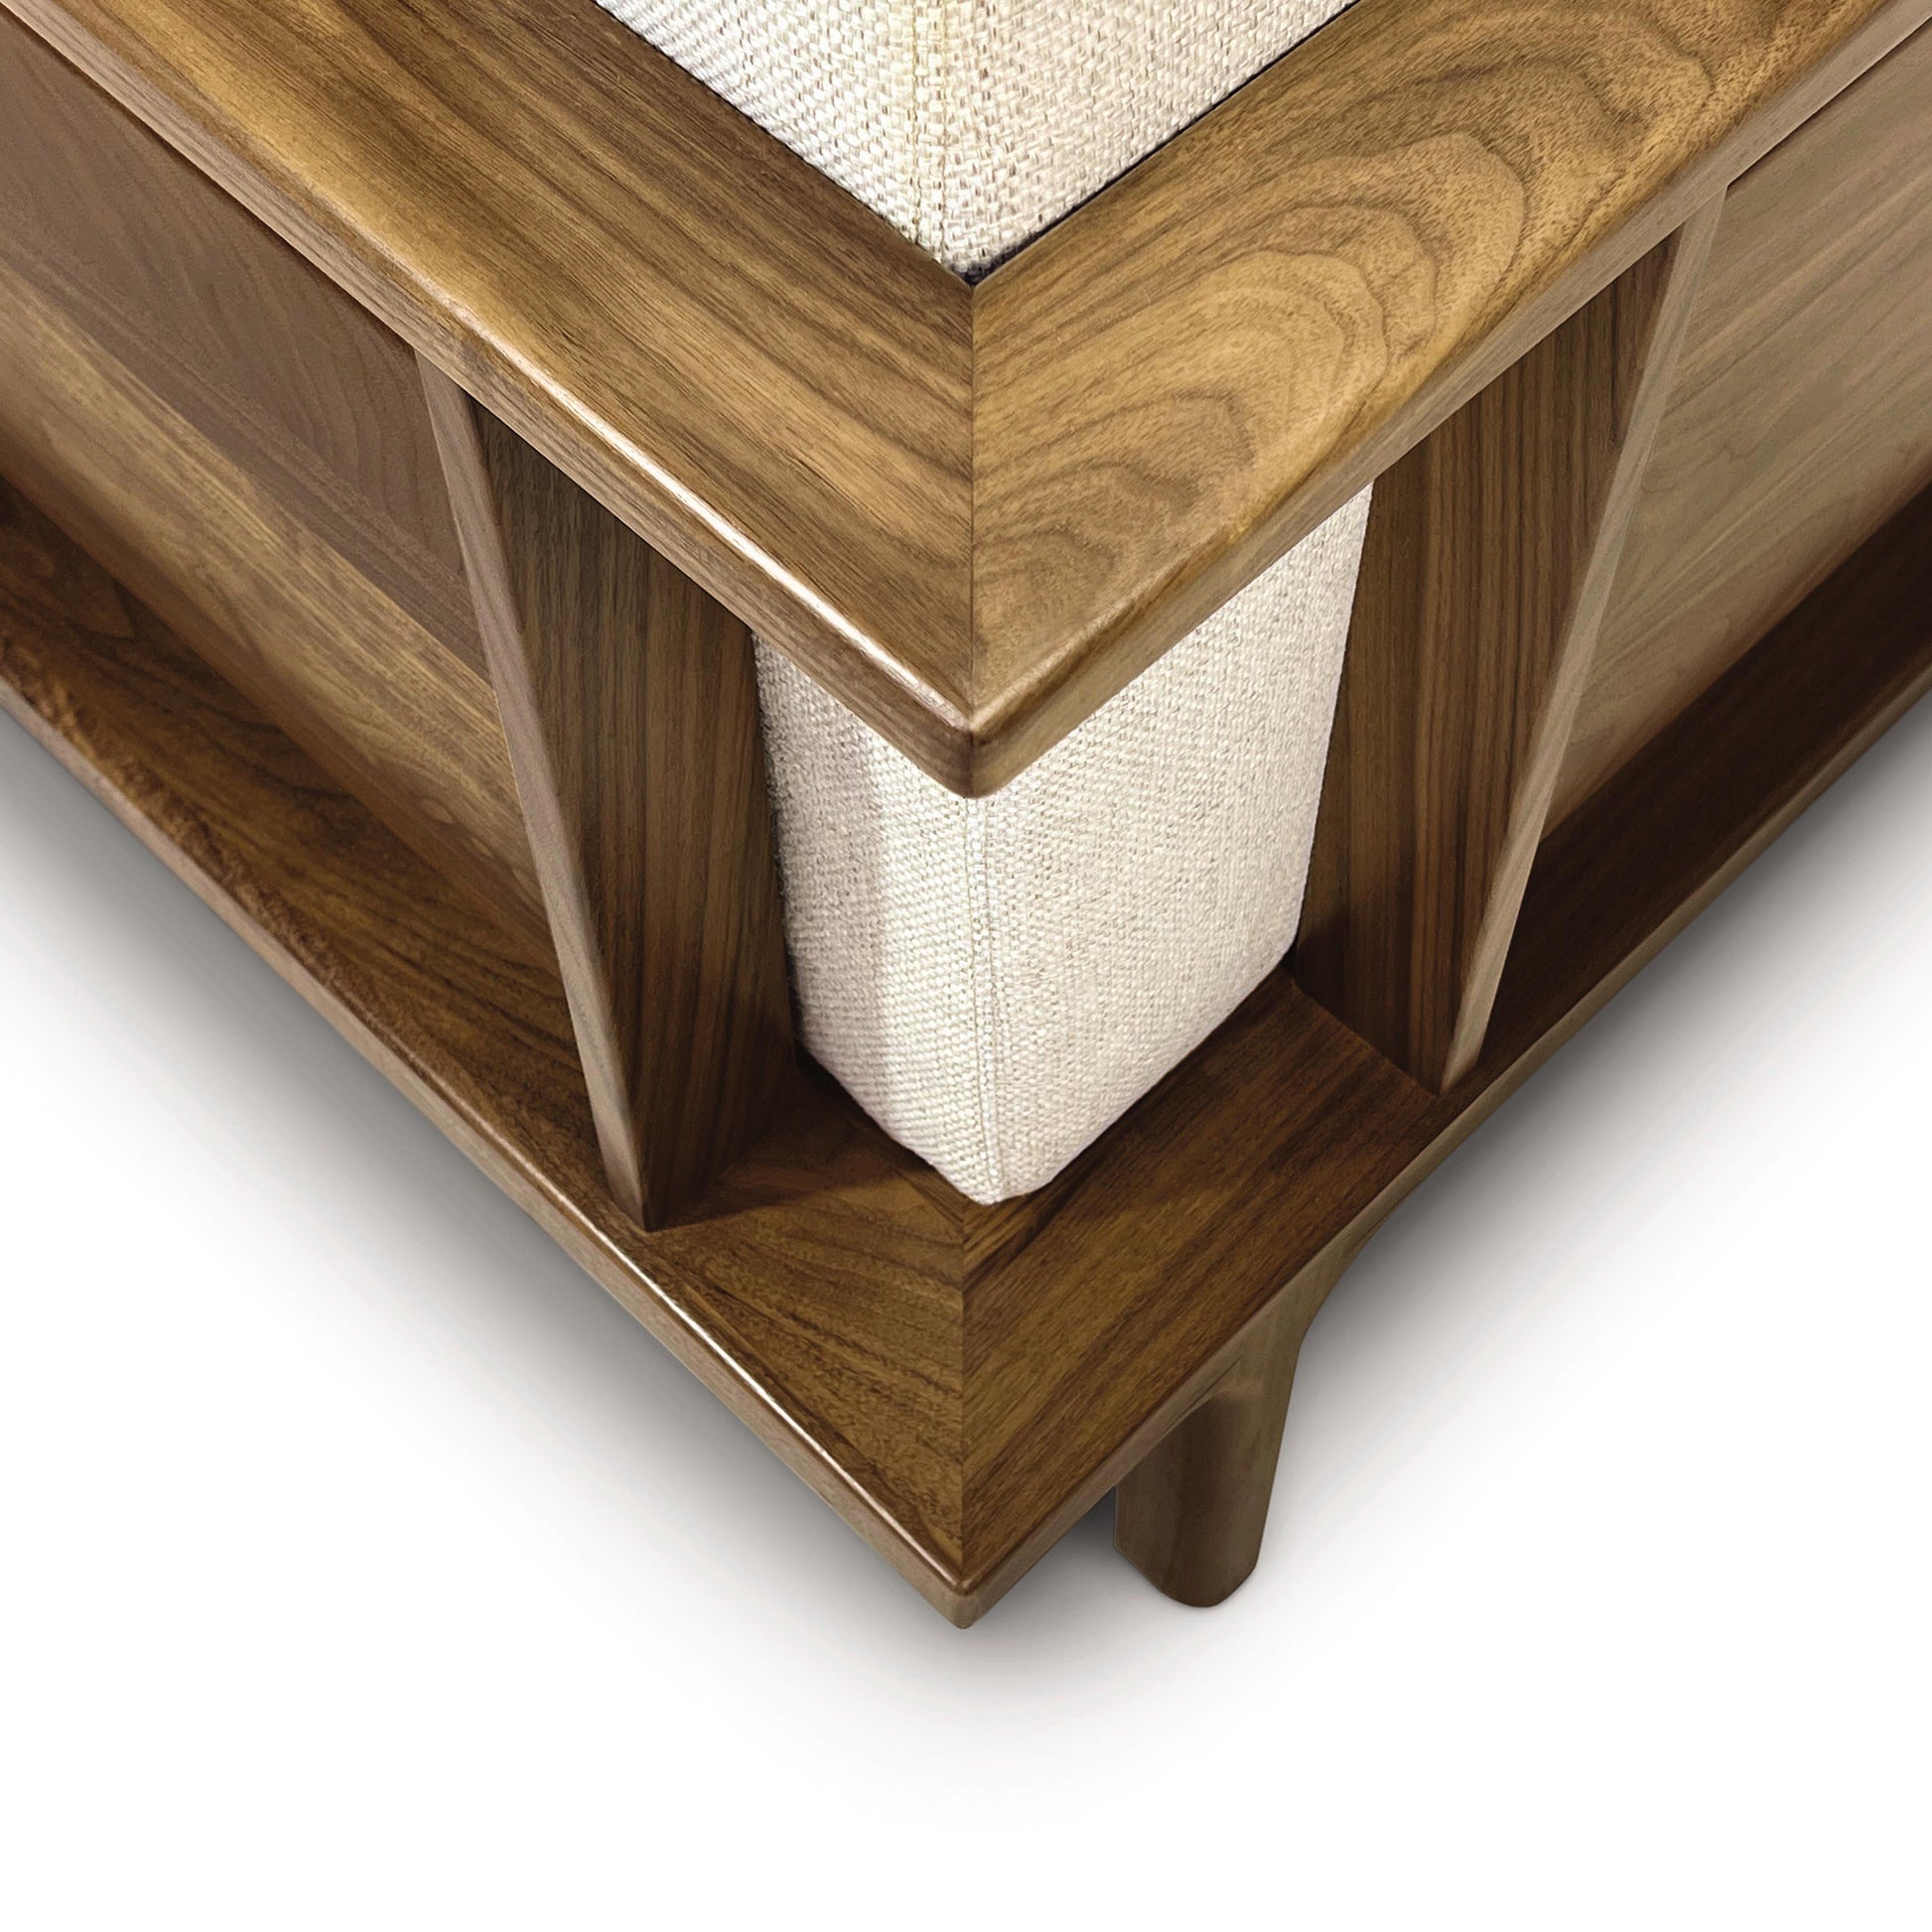 A close up view of a custom solid wood Sierra Walnut Upholstered Chair by Copeland Furniture.